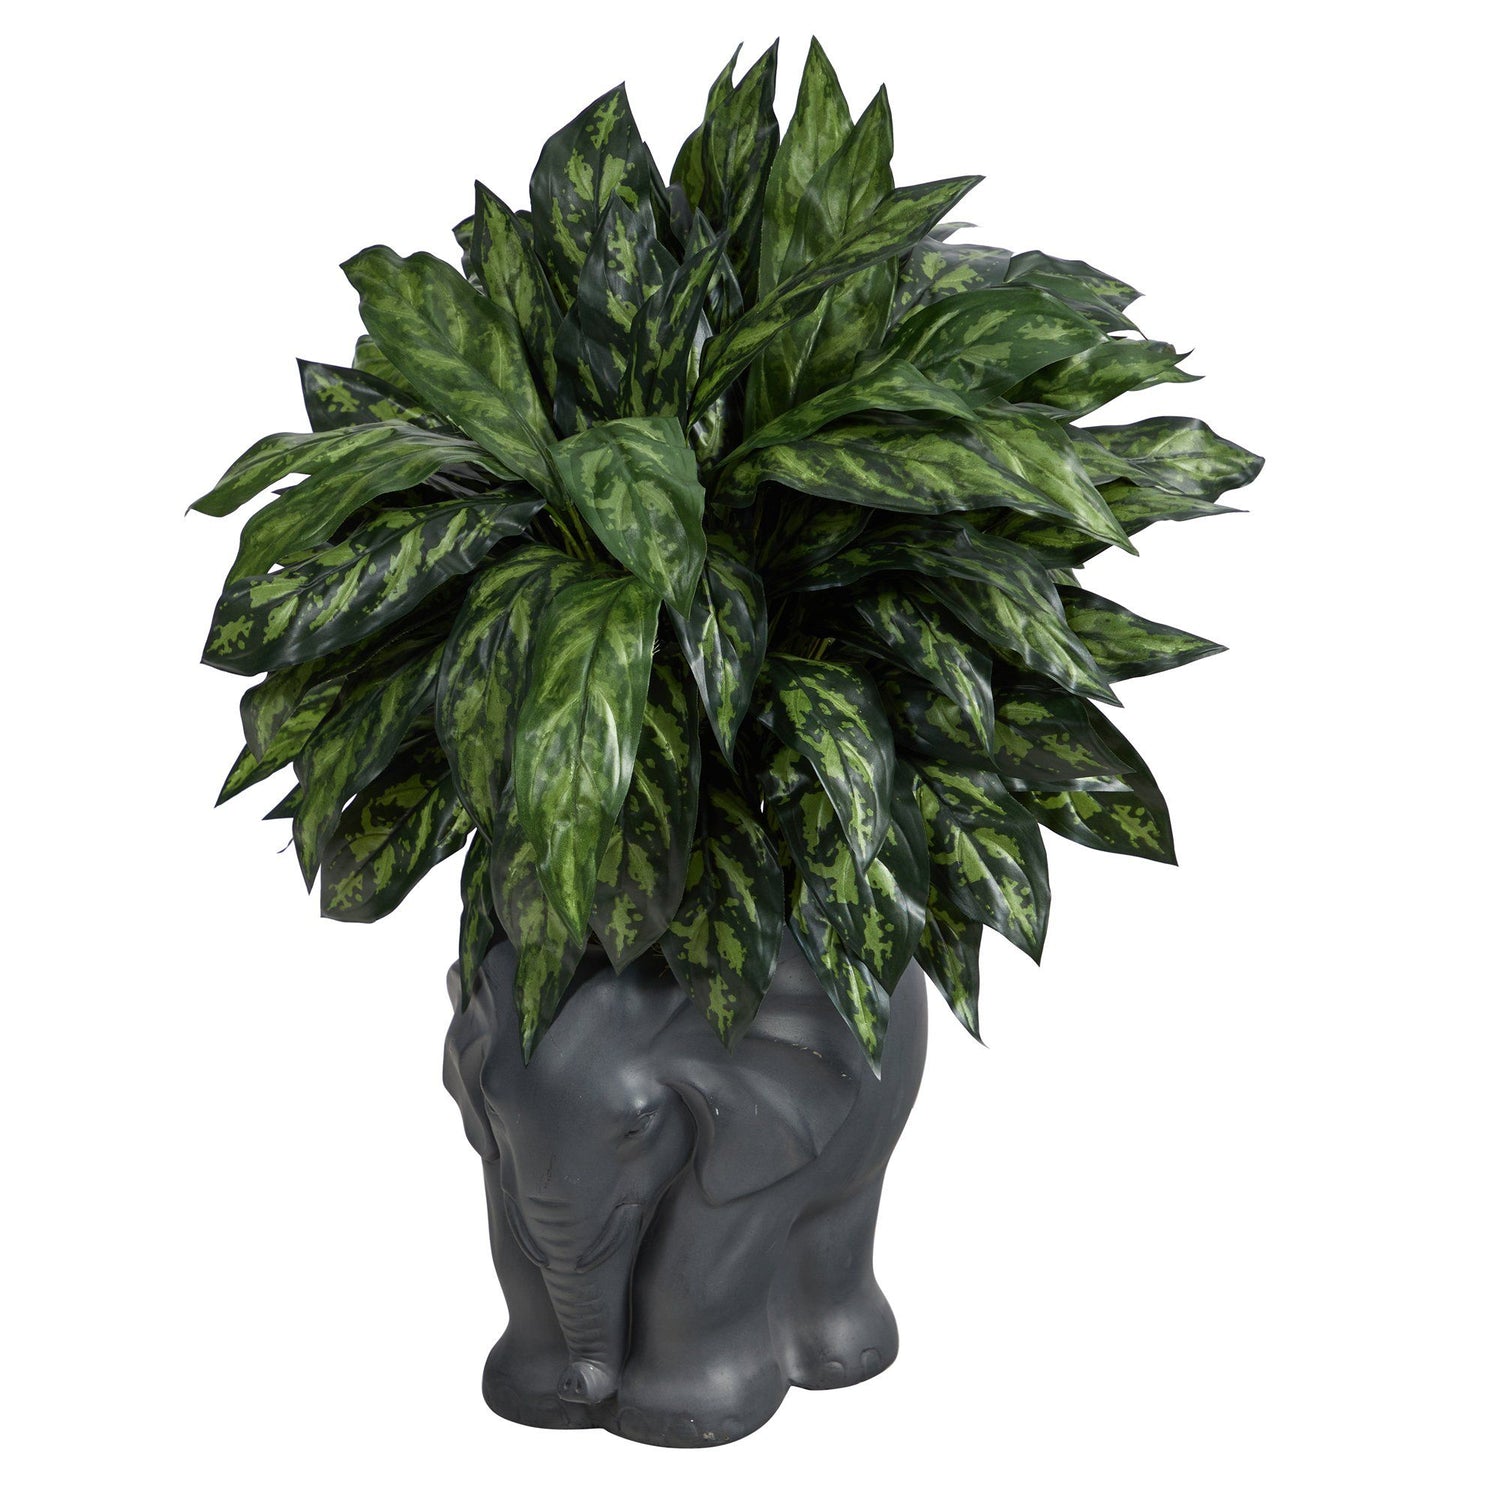 33” Silver King Artificial Plant in Black Elephant Shaped Planter